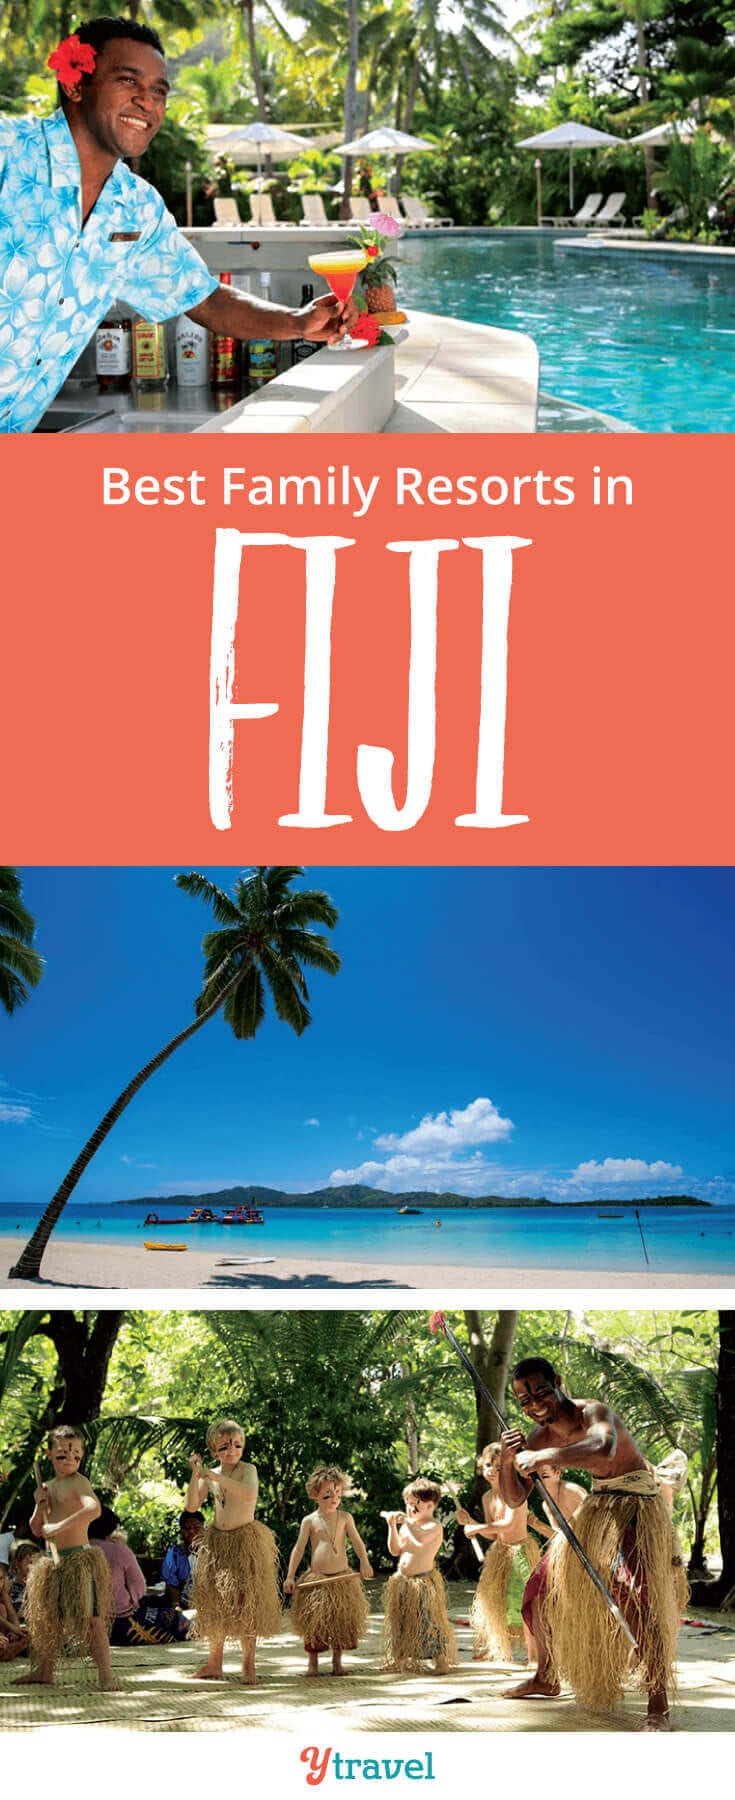 5 best family resorts in Fiji. Planning a Fiji family holiday? Need tips on where to stay in Fiji? Here are the 5 Best Family Resorts in Fiji for your family holiday to the Fijian Islands